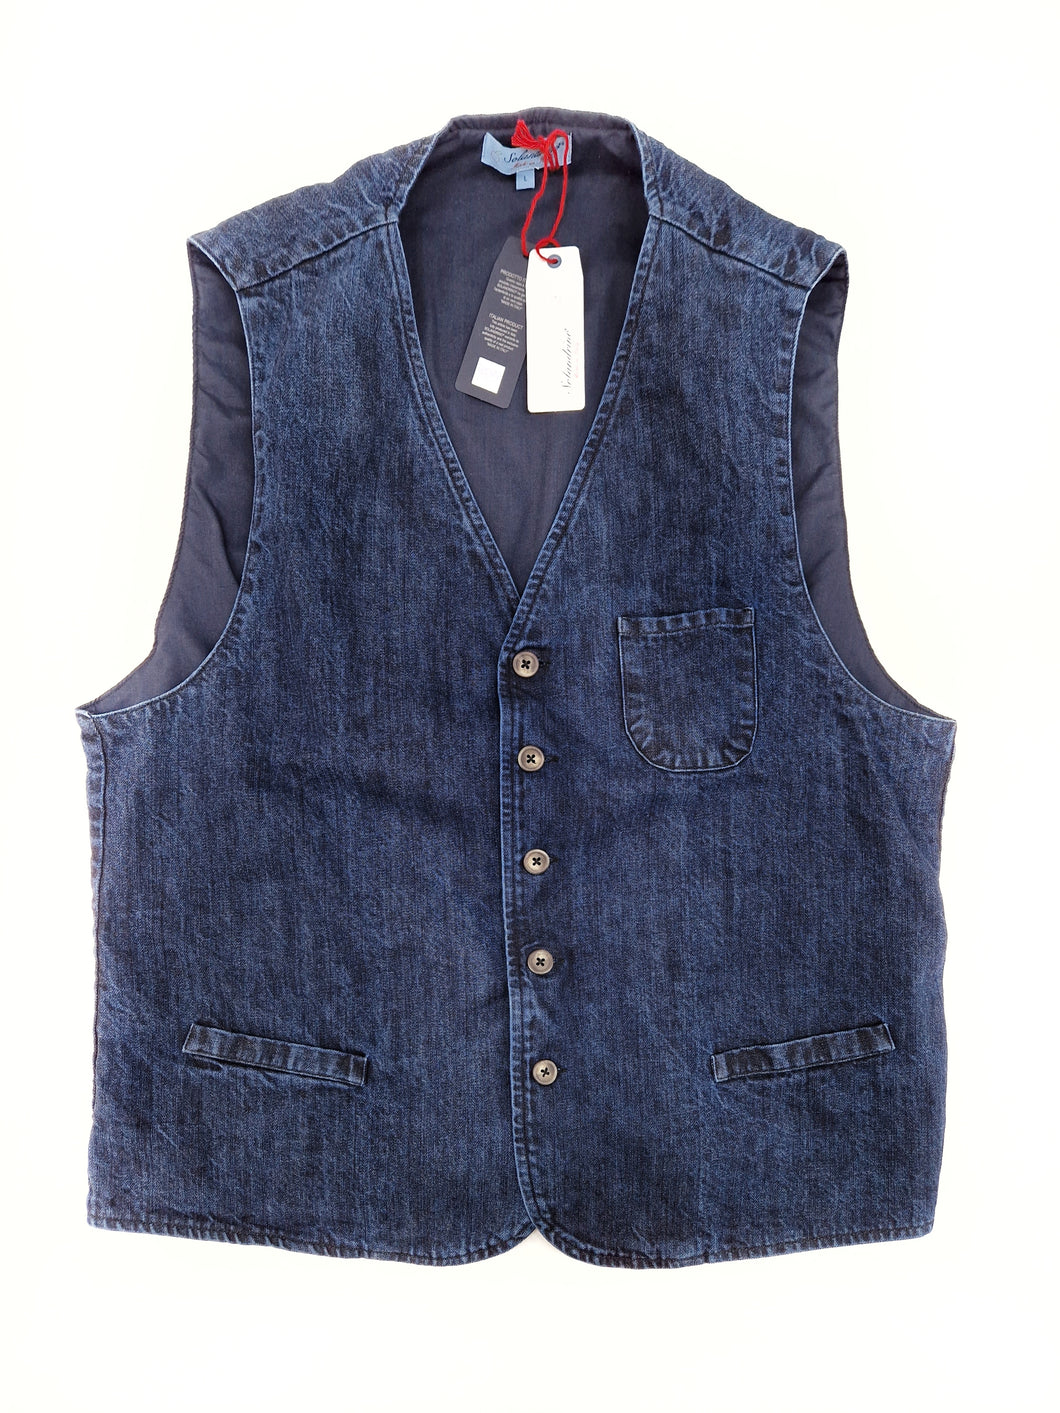 Gilet Panciotto Jeans Blue Denim in 100% Cotone Made in Italy